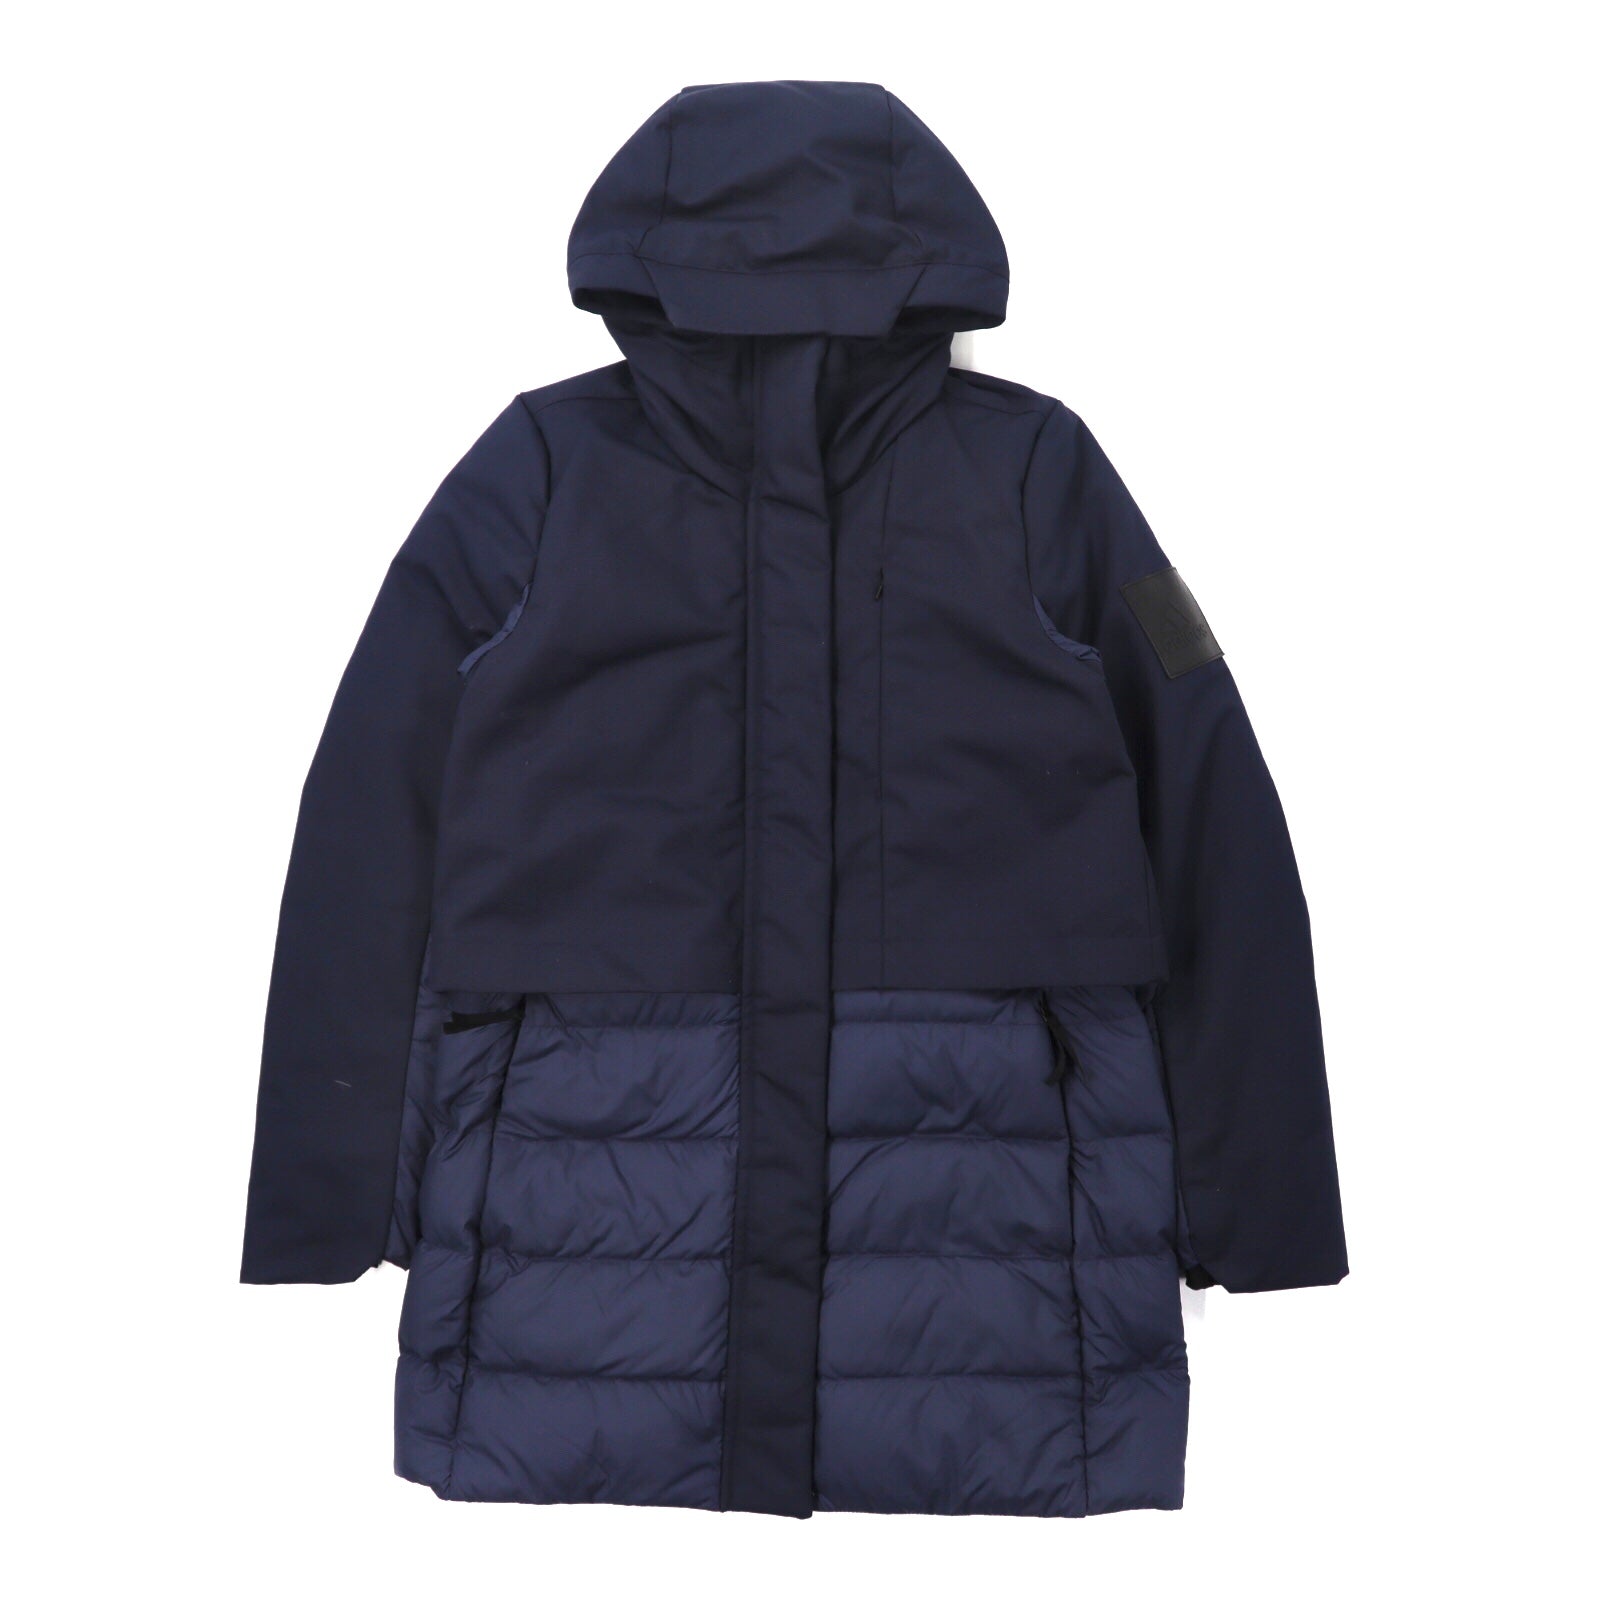 Adidas puffer Coat M Navy Polyester W Climawarm Jacket CY8633